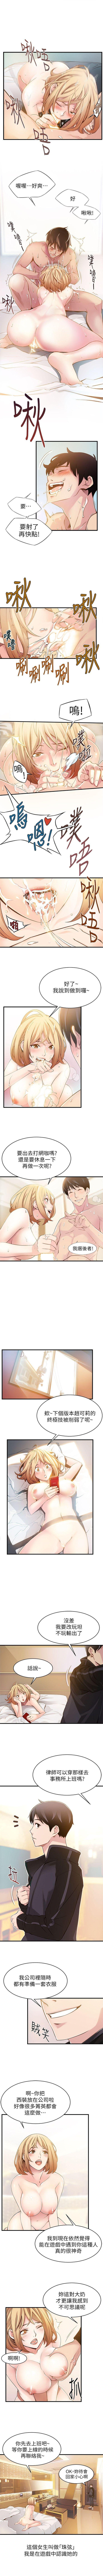 Hot 弱點 1-107 官方中文（連載中） Sexteen - Page 3